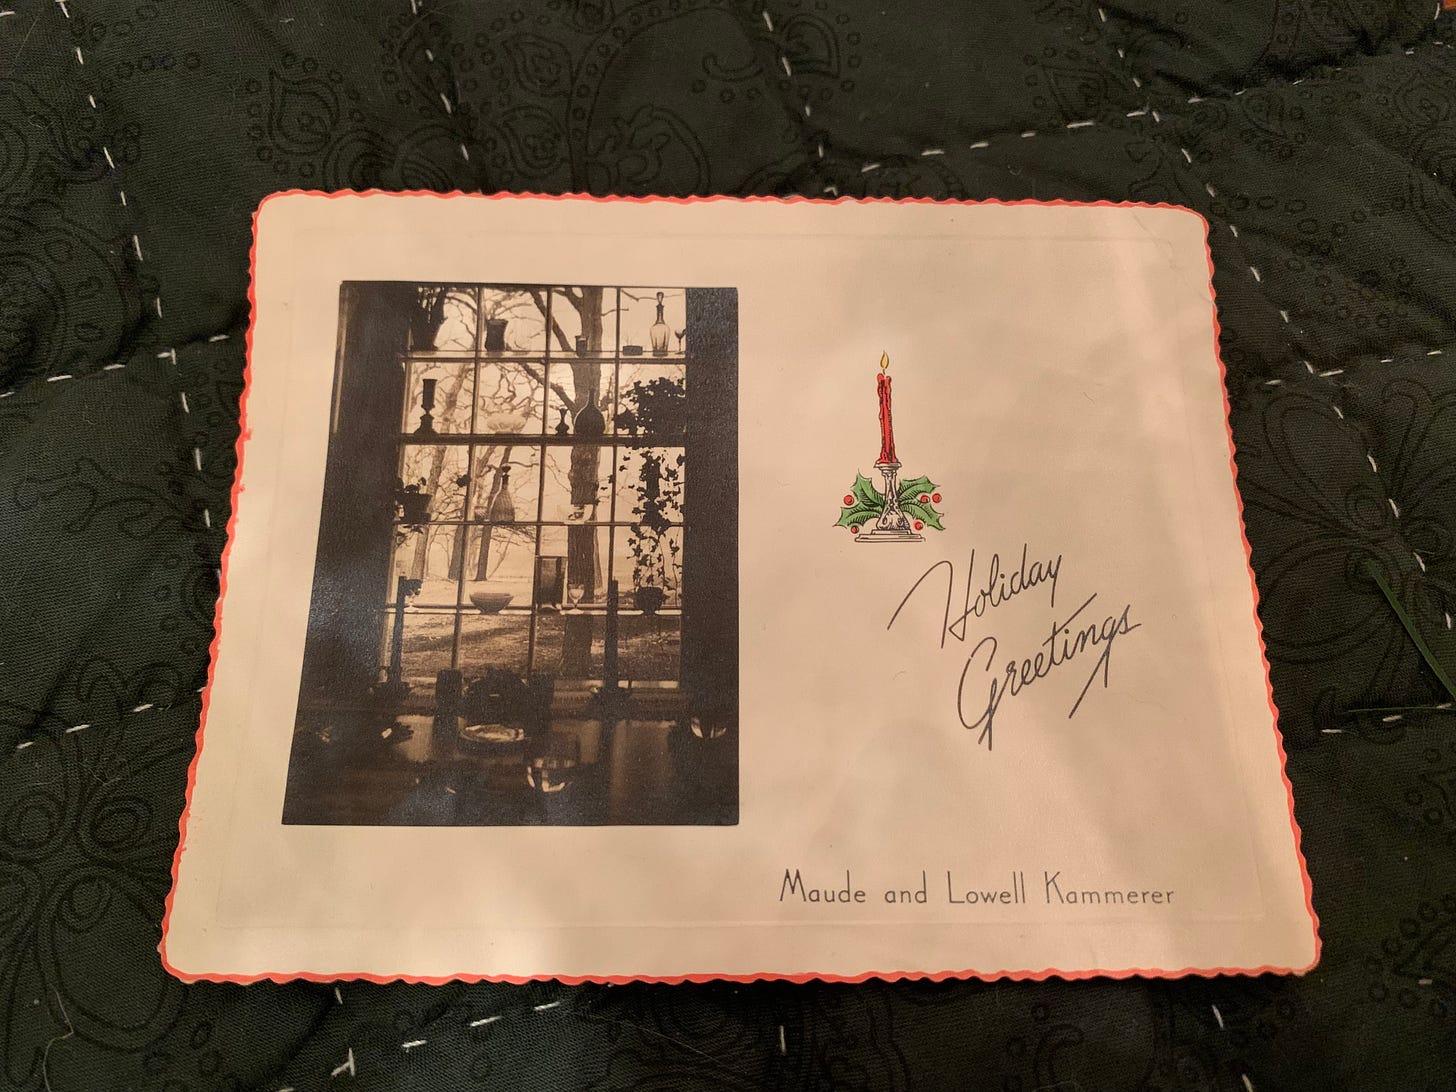 White cardstock with scalloped edges dipped in red ink. On the left is a photo of a bay window with shelves and on the right text reads “Holiday Greetings, Maude and Lowell Kammerer.”